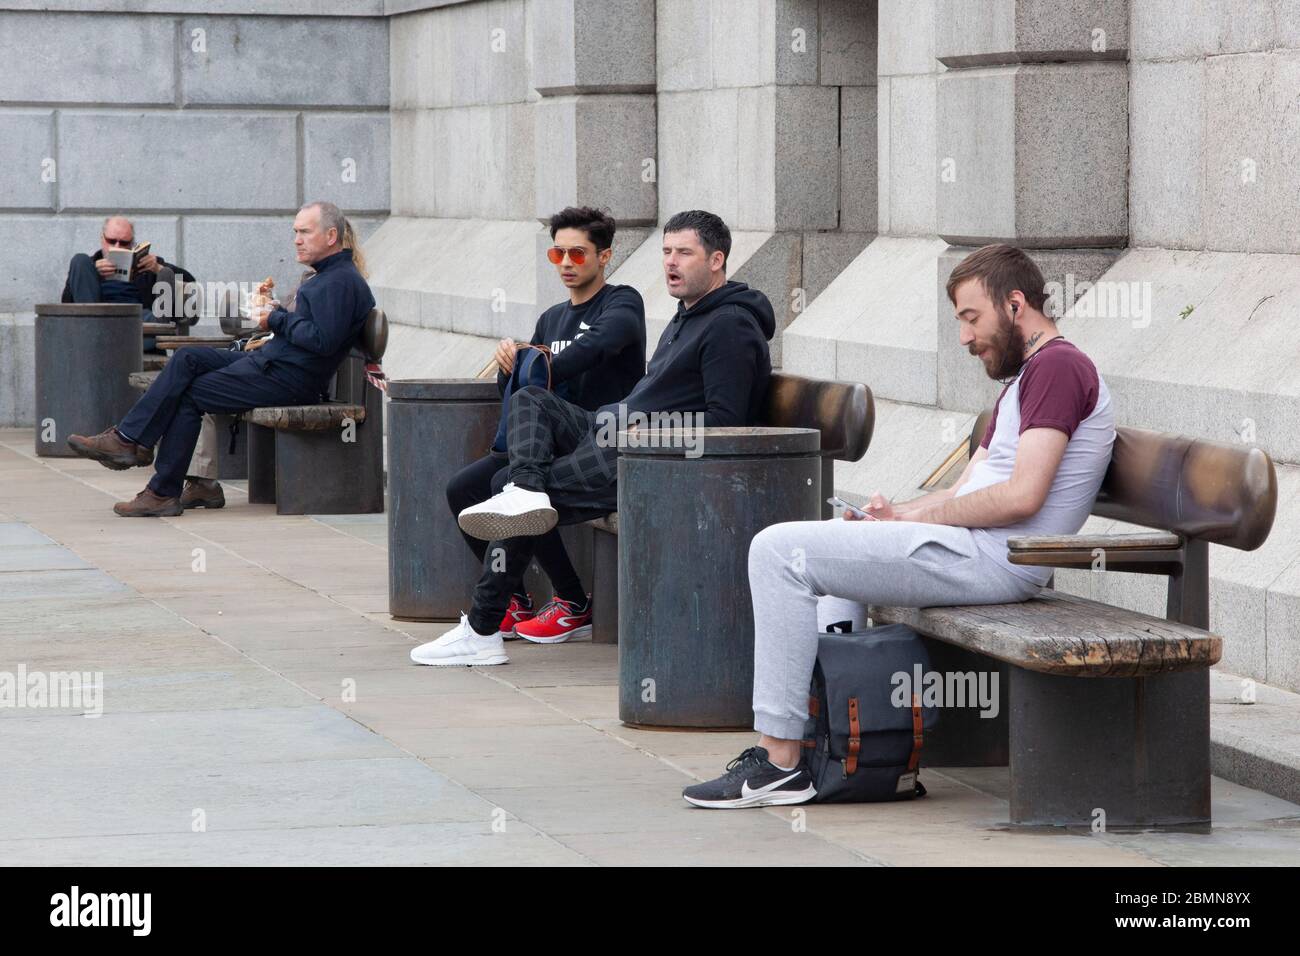 London, UK: although strictly speaking sitting on public benches is not  allowed under social-distancing advice, these groups have at least kept  their distance from each other. Prime Minister Boris Johnson is poised